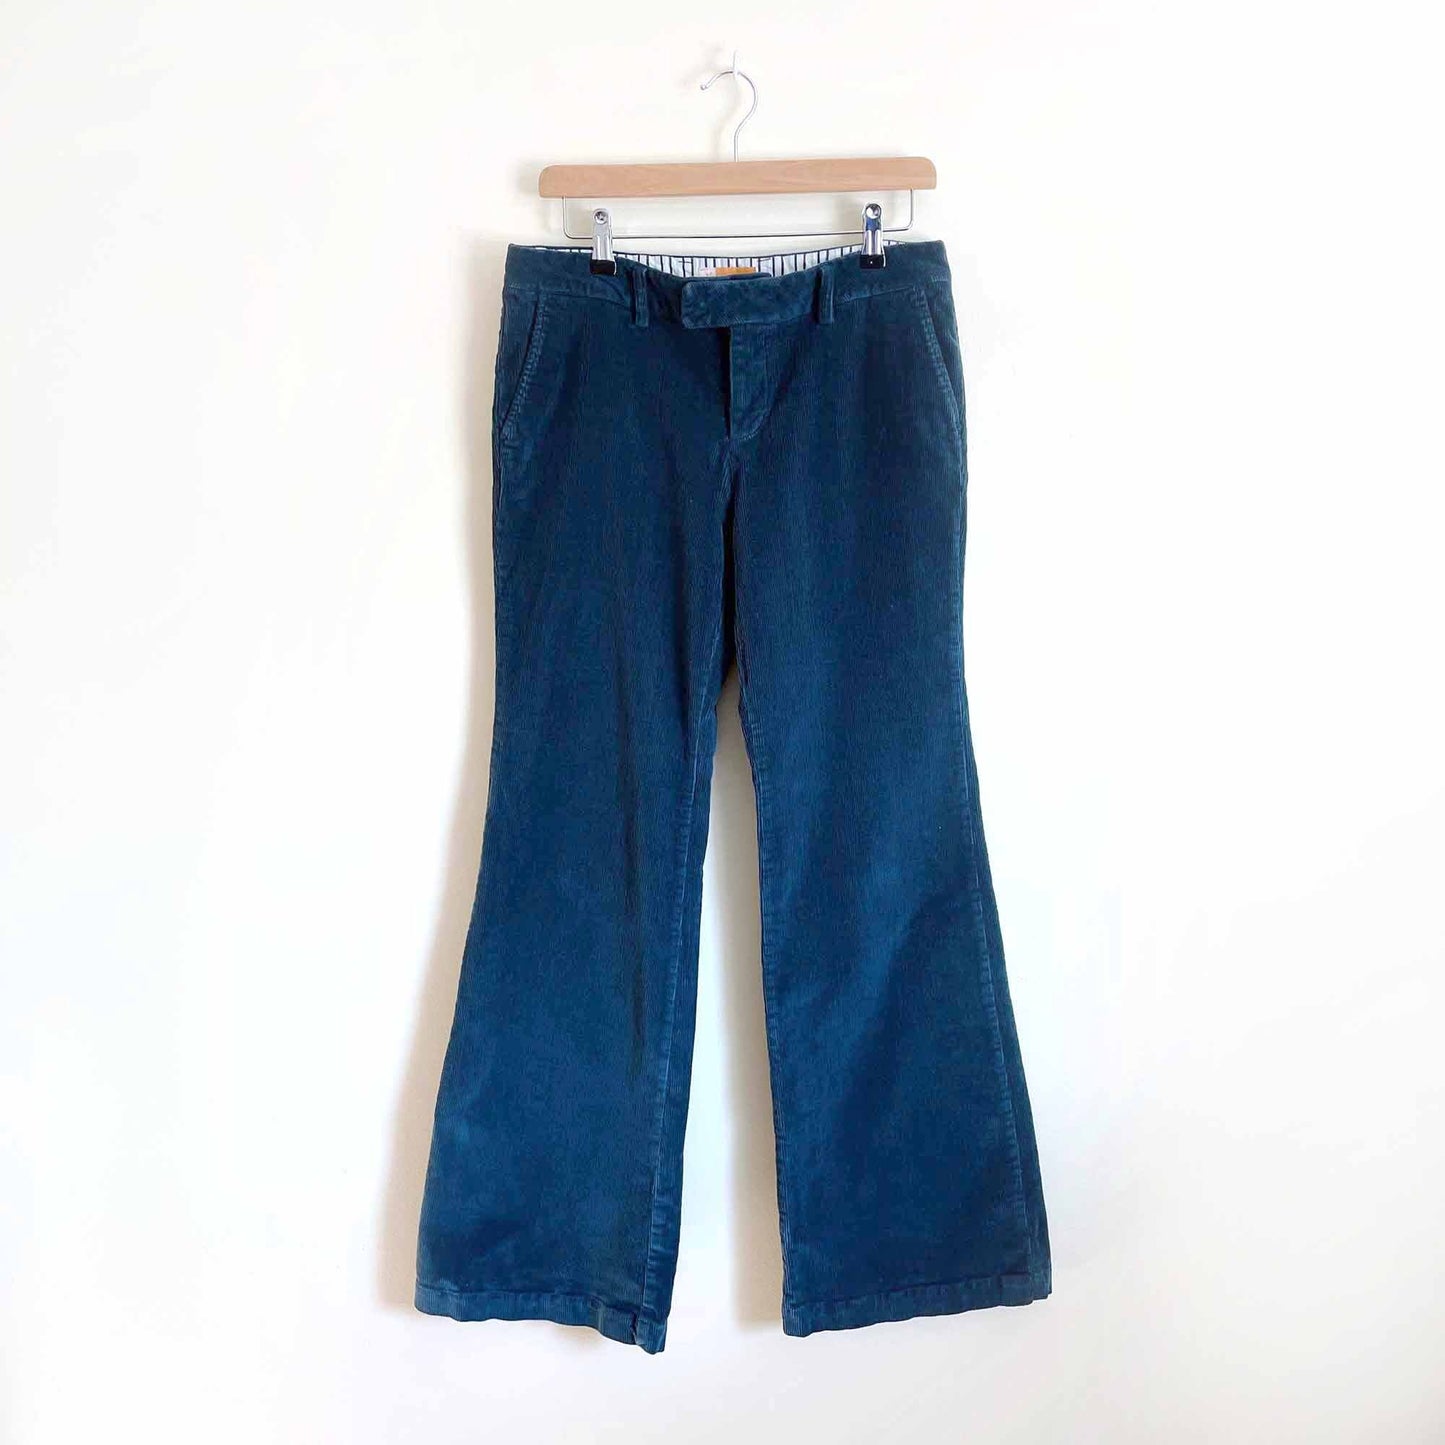 Anthroplogie Tulle wide leg corduroy trousers - size 6